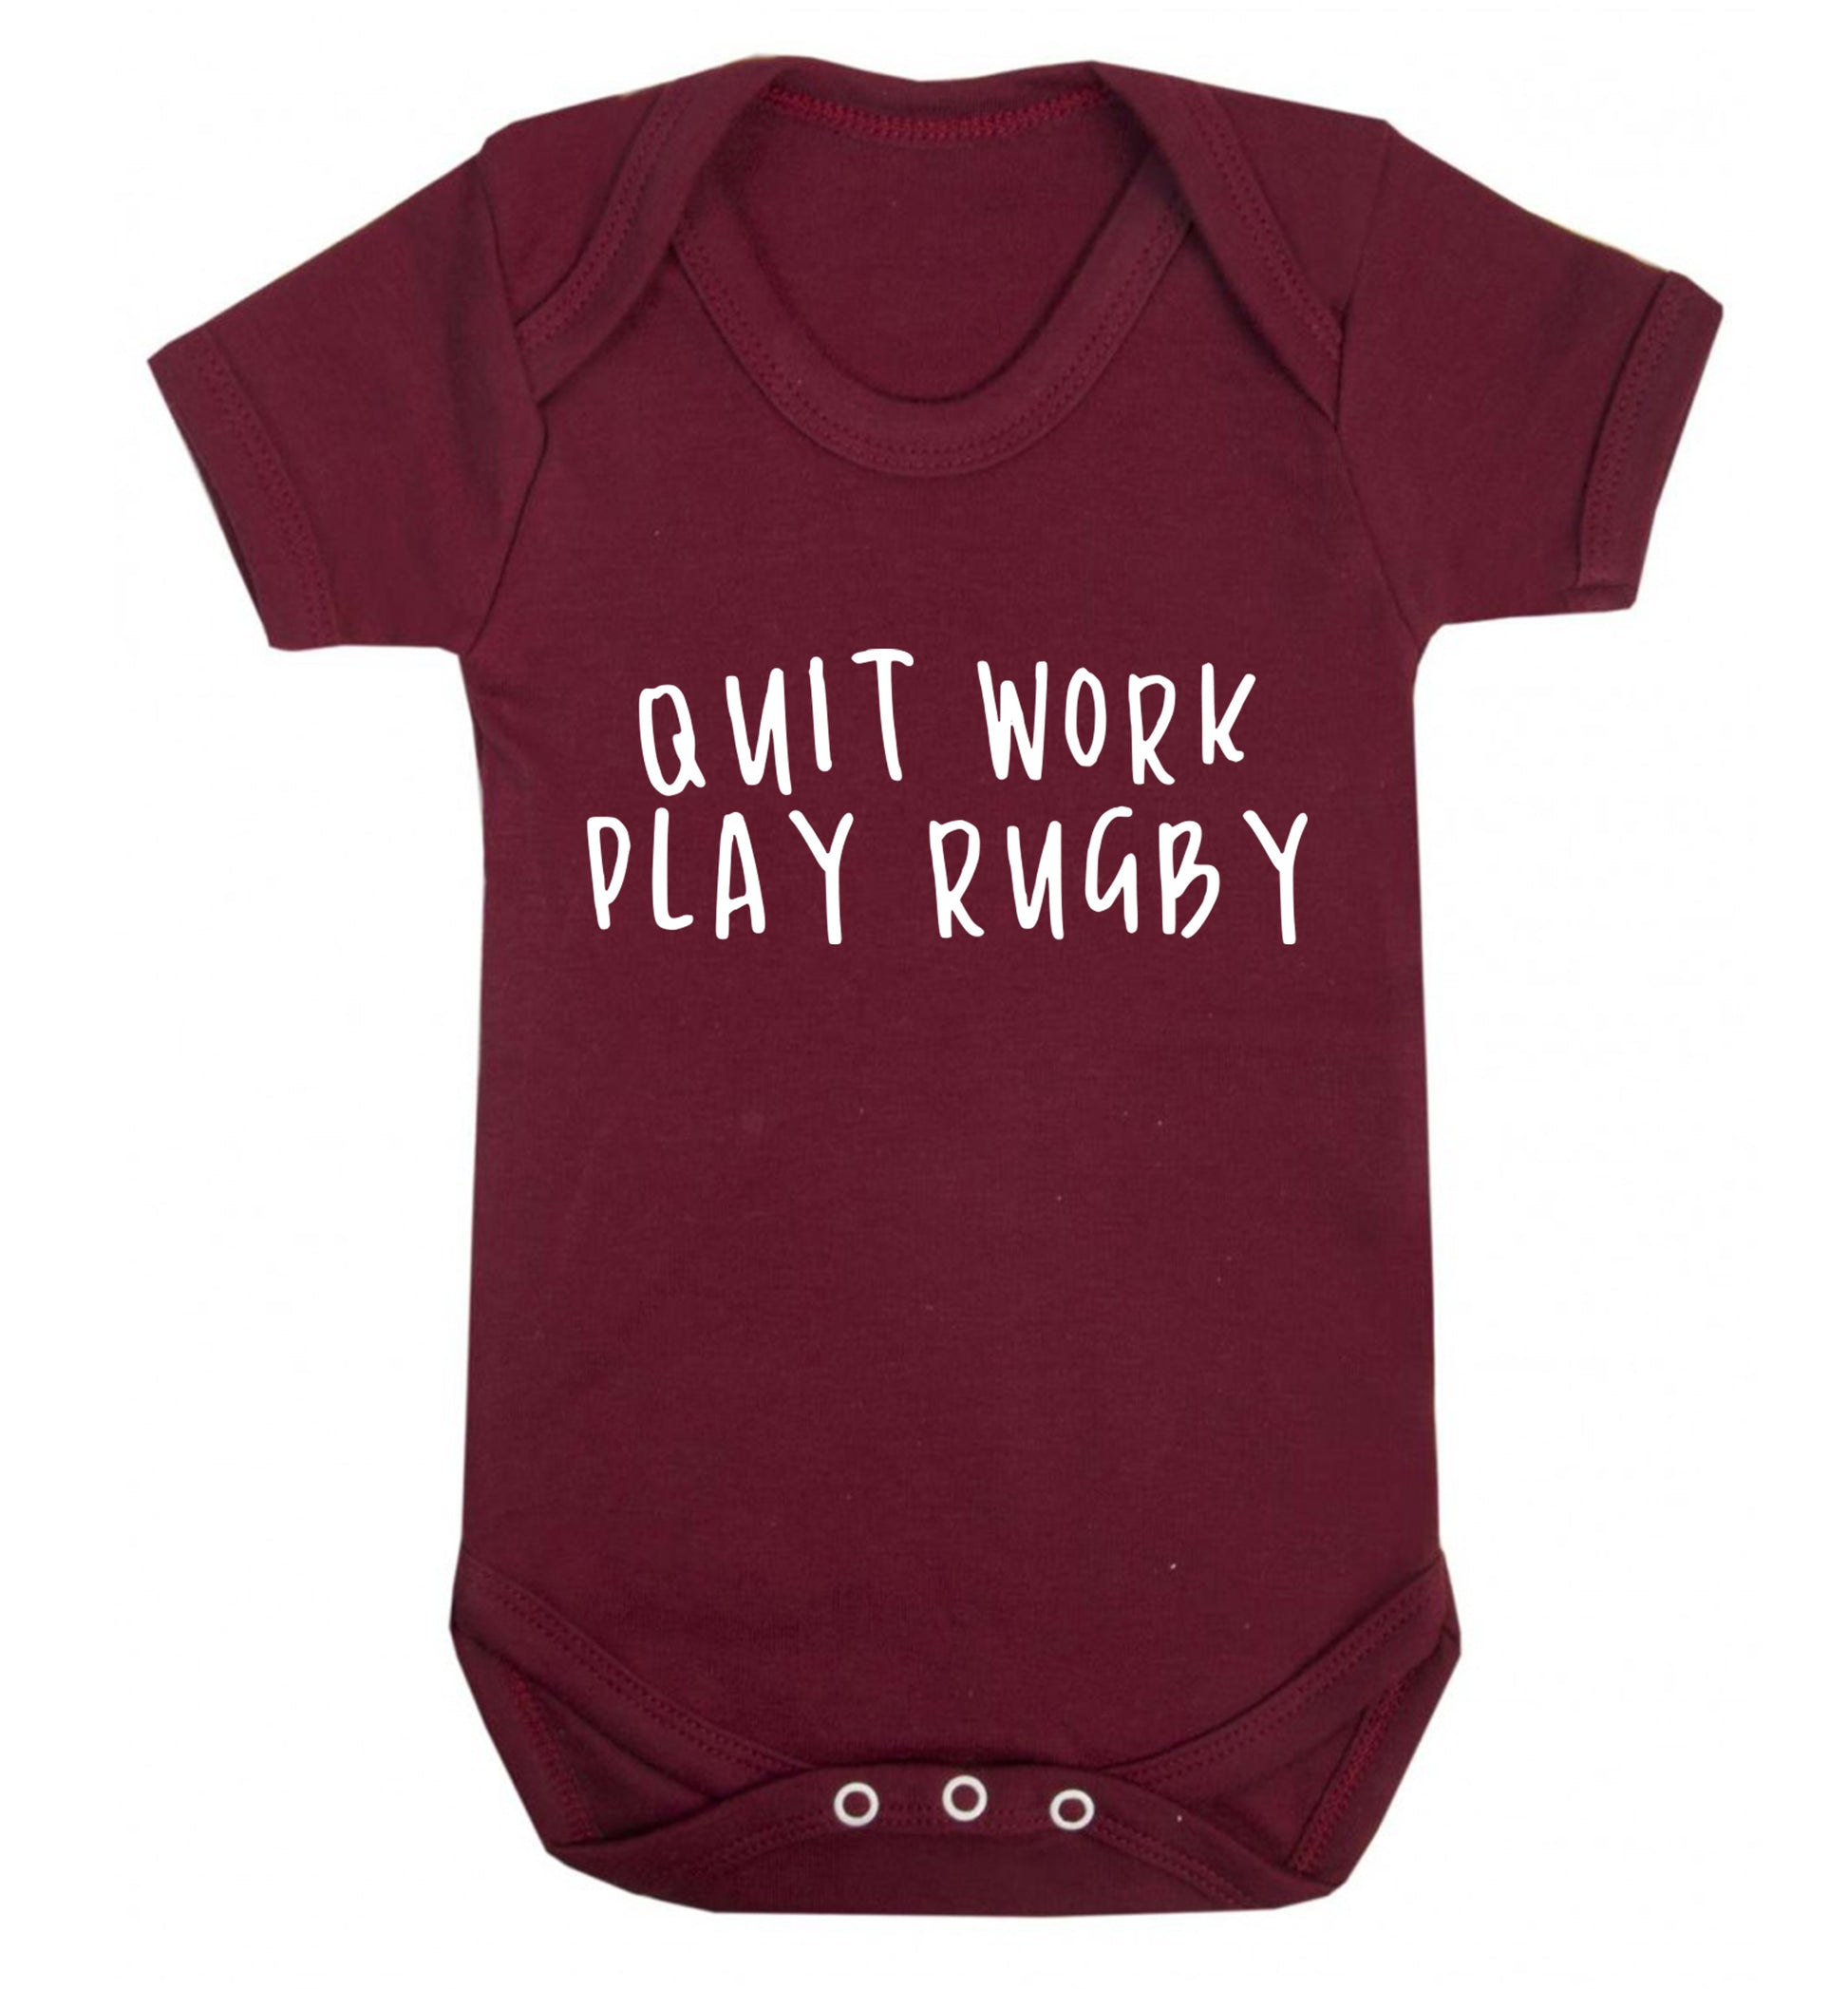 Quit work play rugby Baby Vest maroon 18-24 months